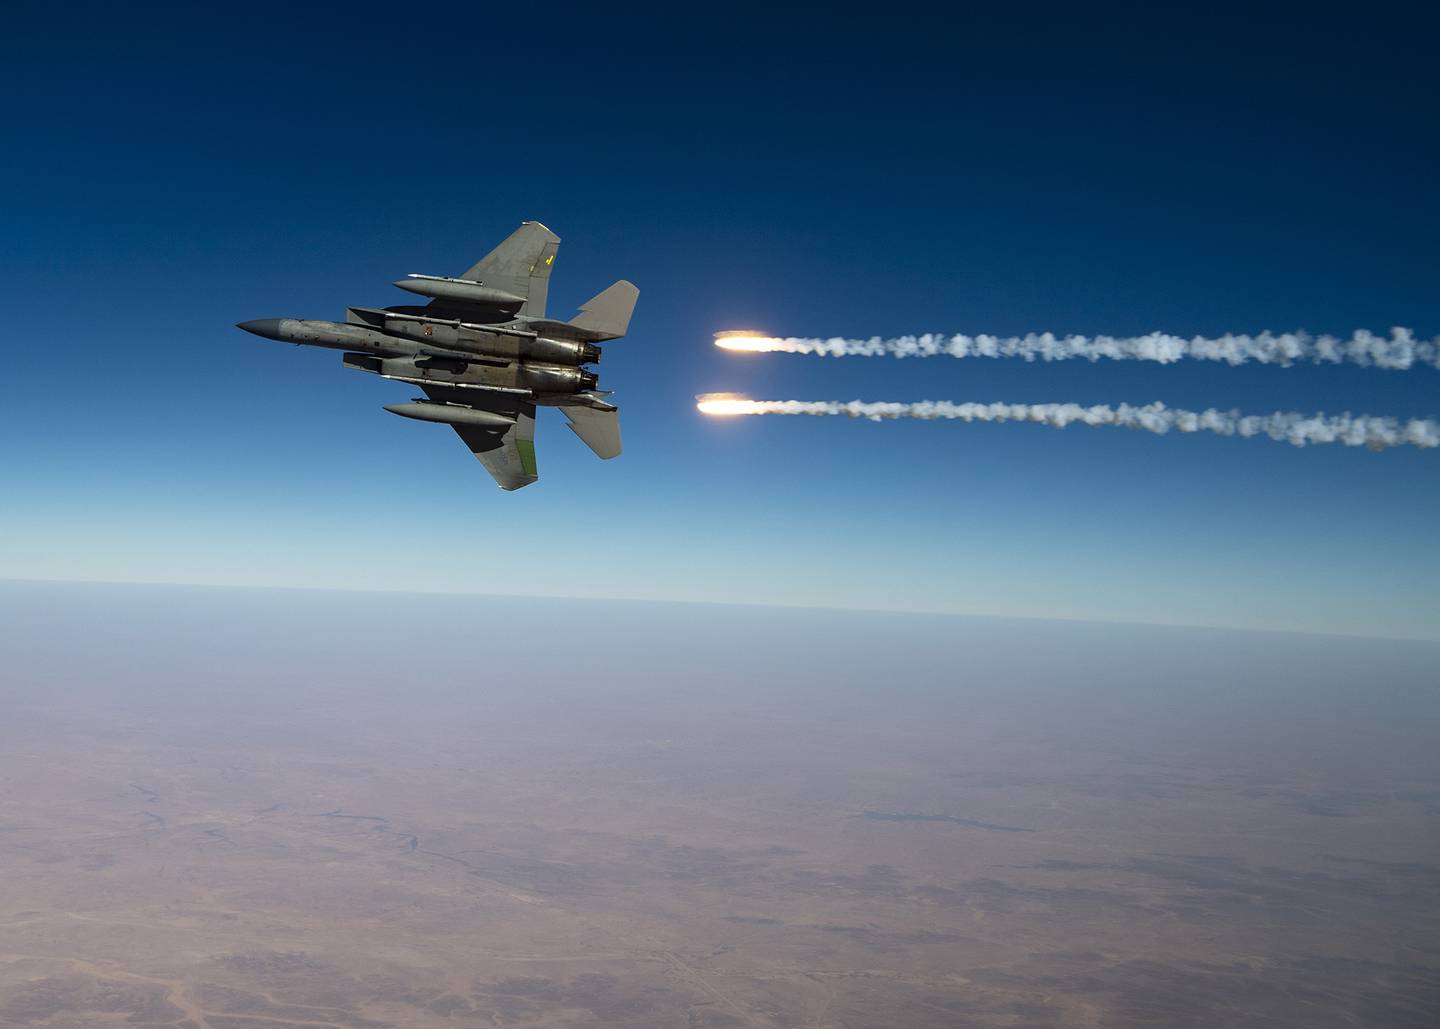 A U.S. Air Force F-15C Eagles release flares over the U.S. Central Command area of responsibility Aug. 13, 2020